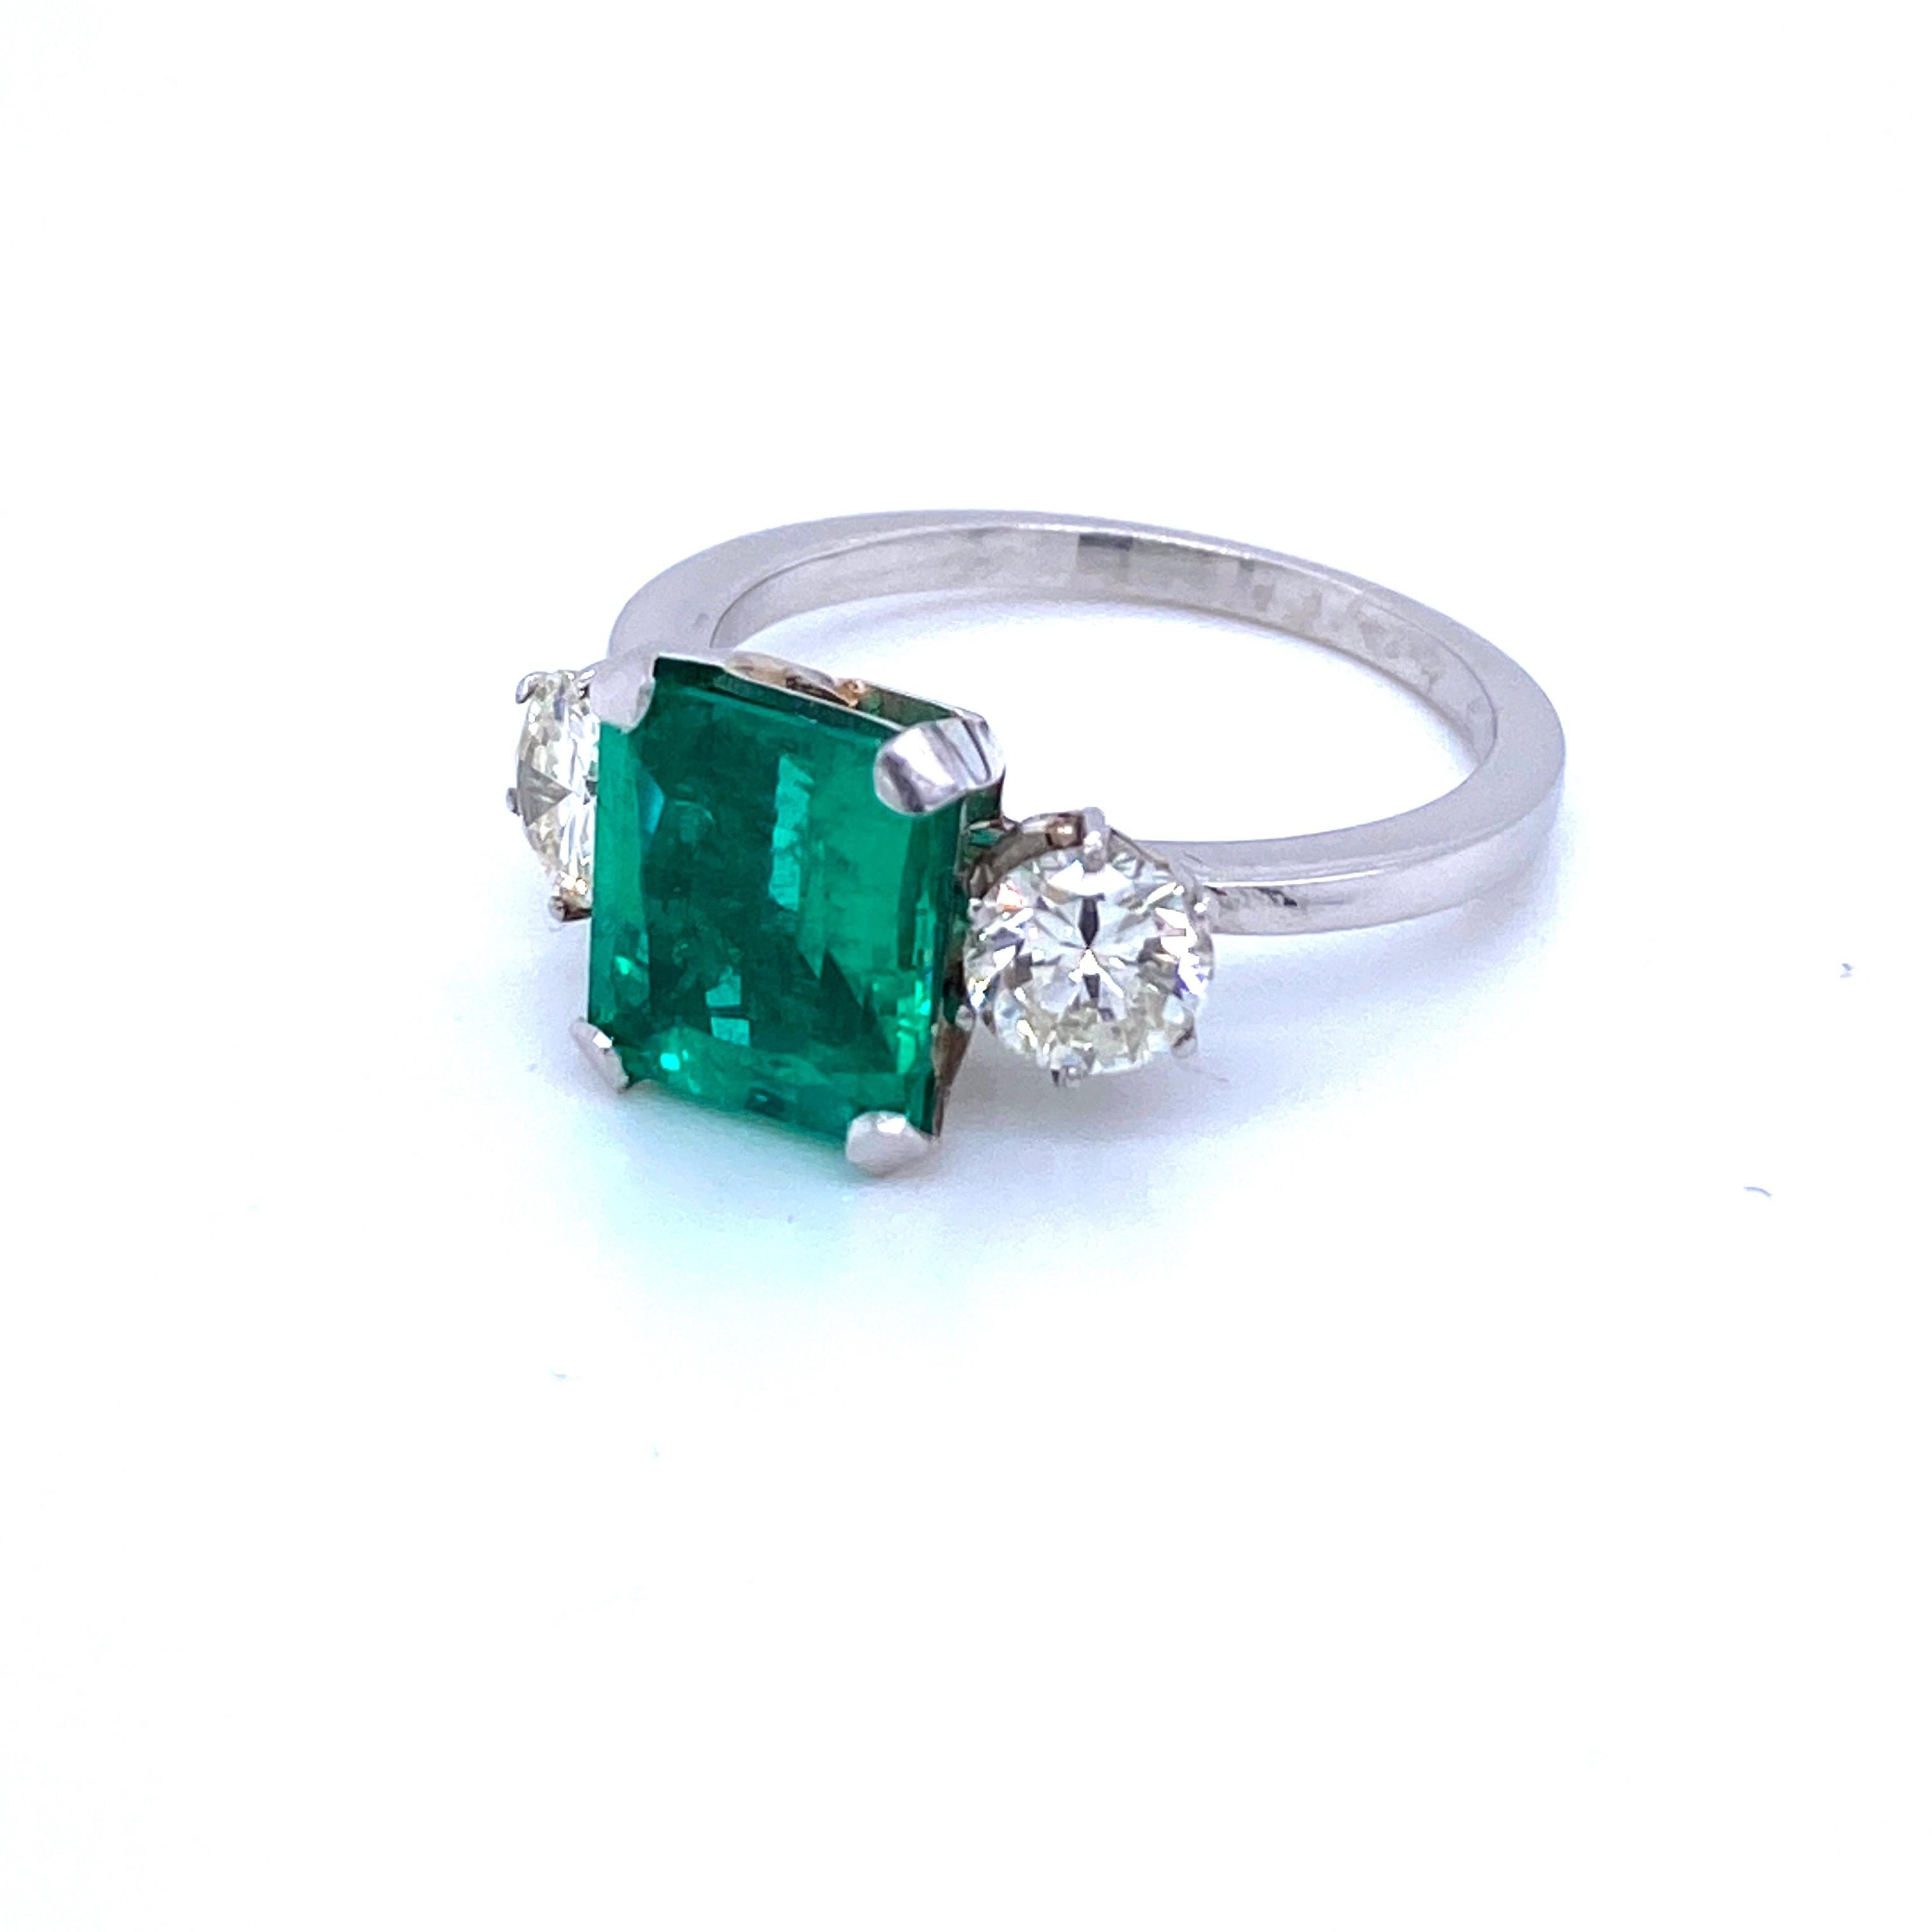 Estate Certified 2.75 Carat Colombian Emerald Diamond Platinum Ring In Excellent Condition For Sale In Napoli, Italy